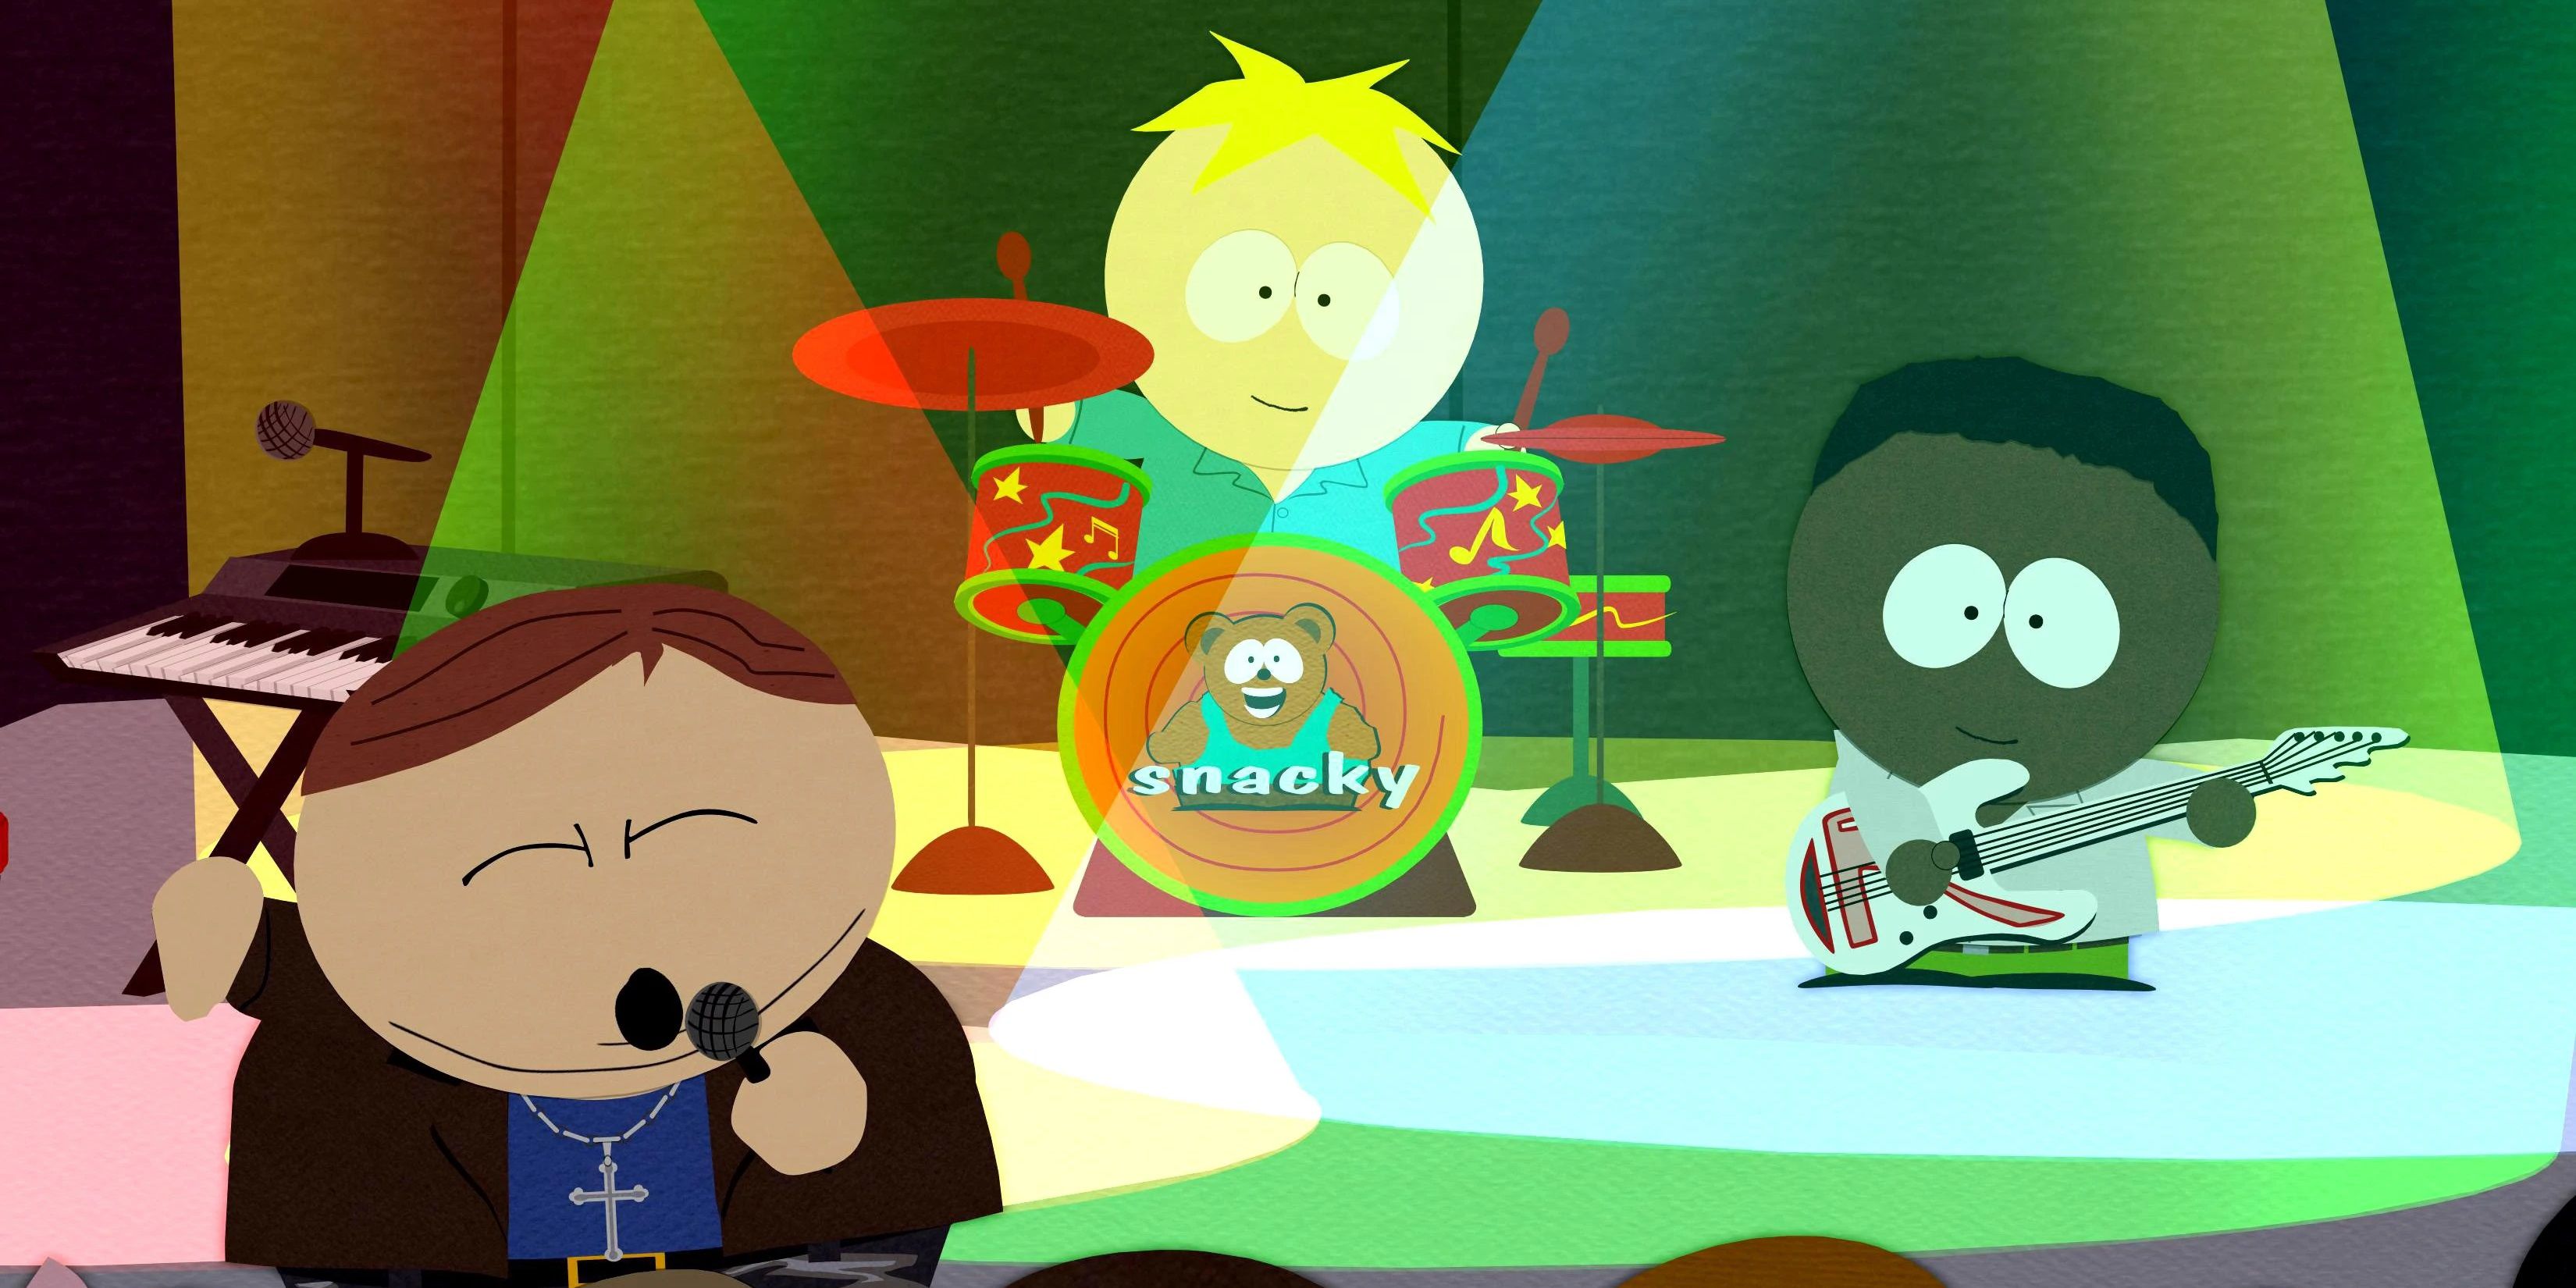 South Park Cartmans 10 Funniest Storylines Ranked